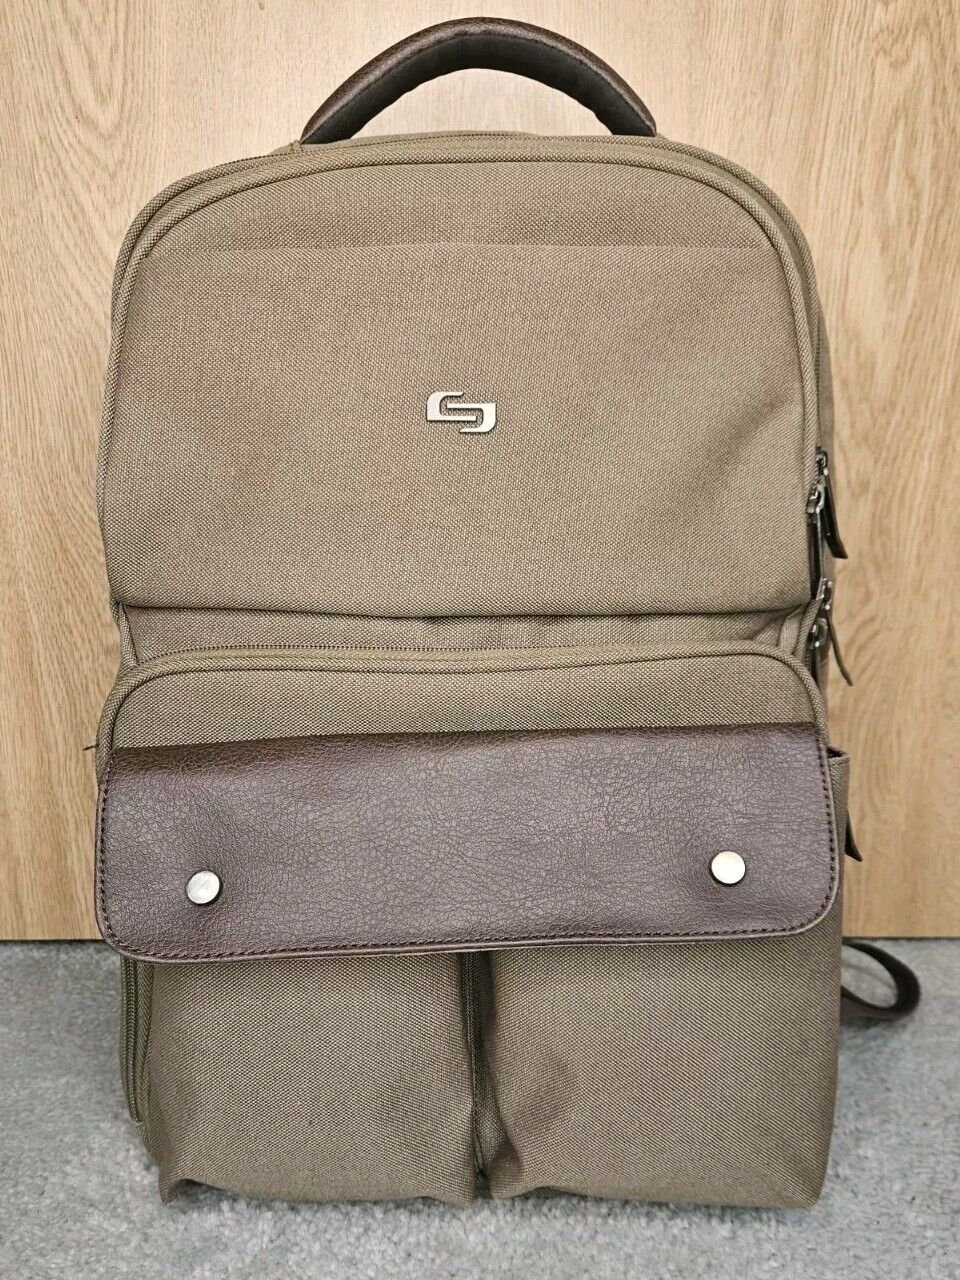 Solo Laptop Bag Backpack Executive Laptop Case Military Green/Brown